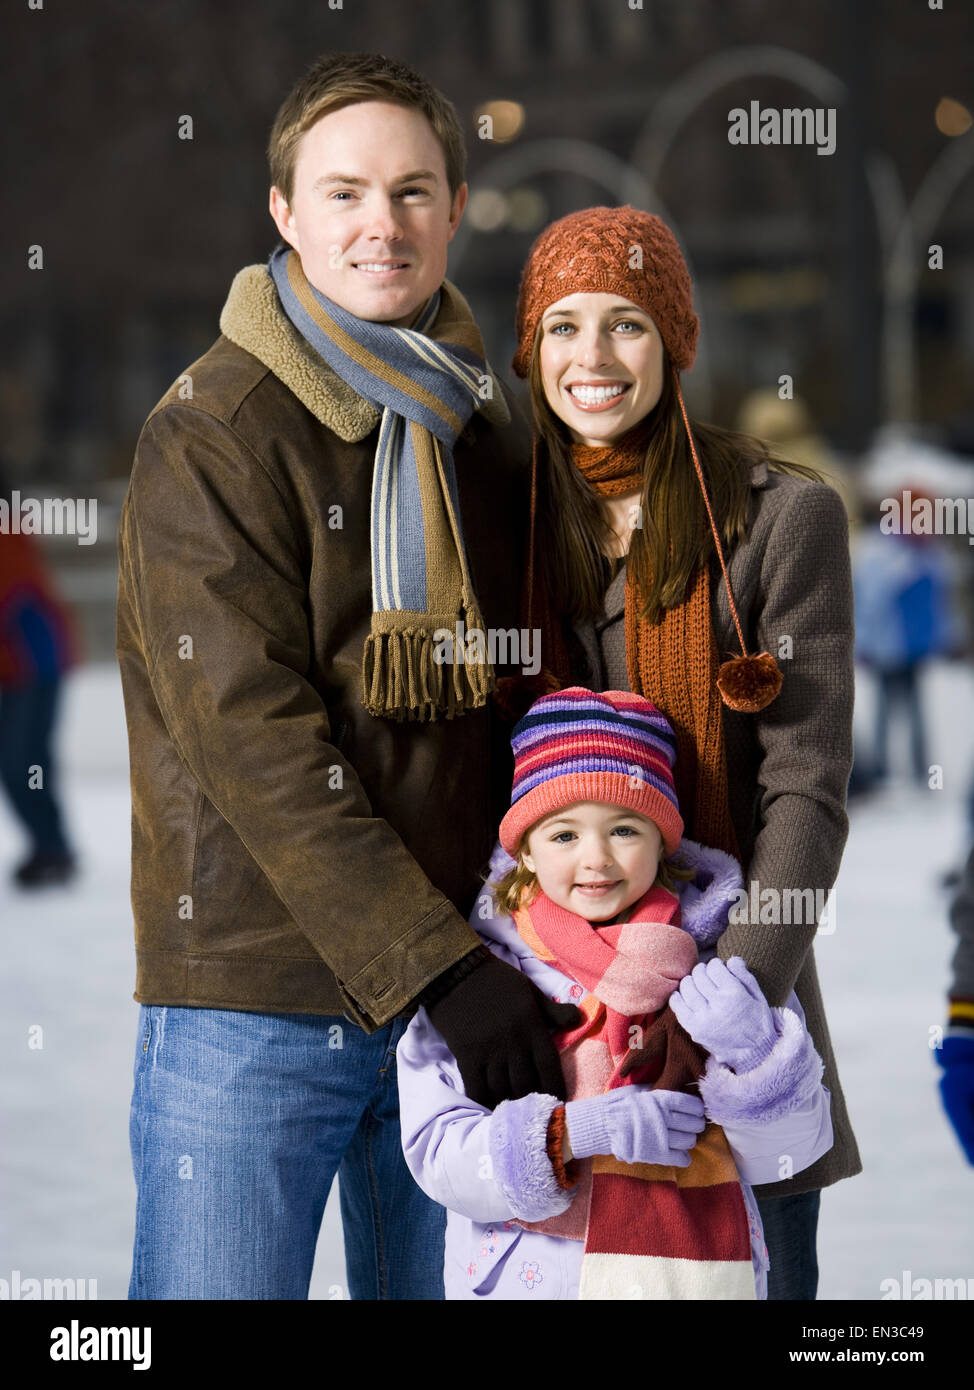 Man and woman with little girl outdoors in winter Stock Photo